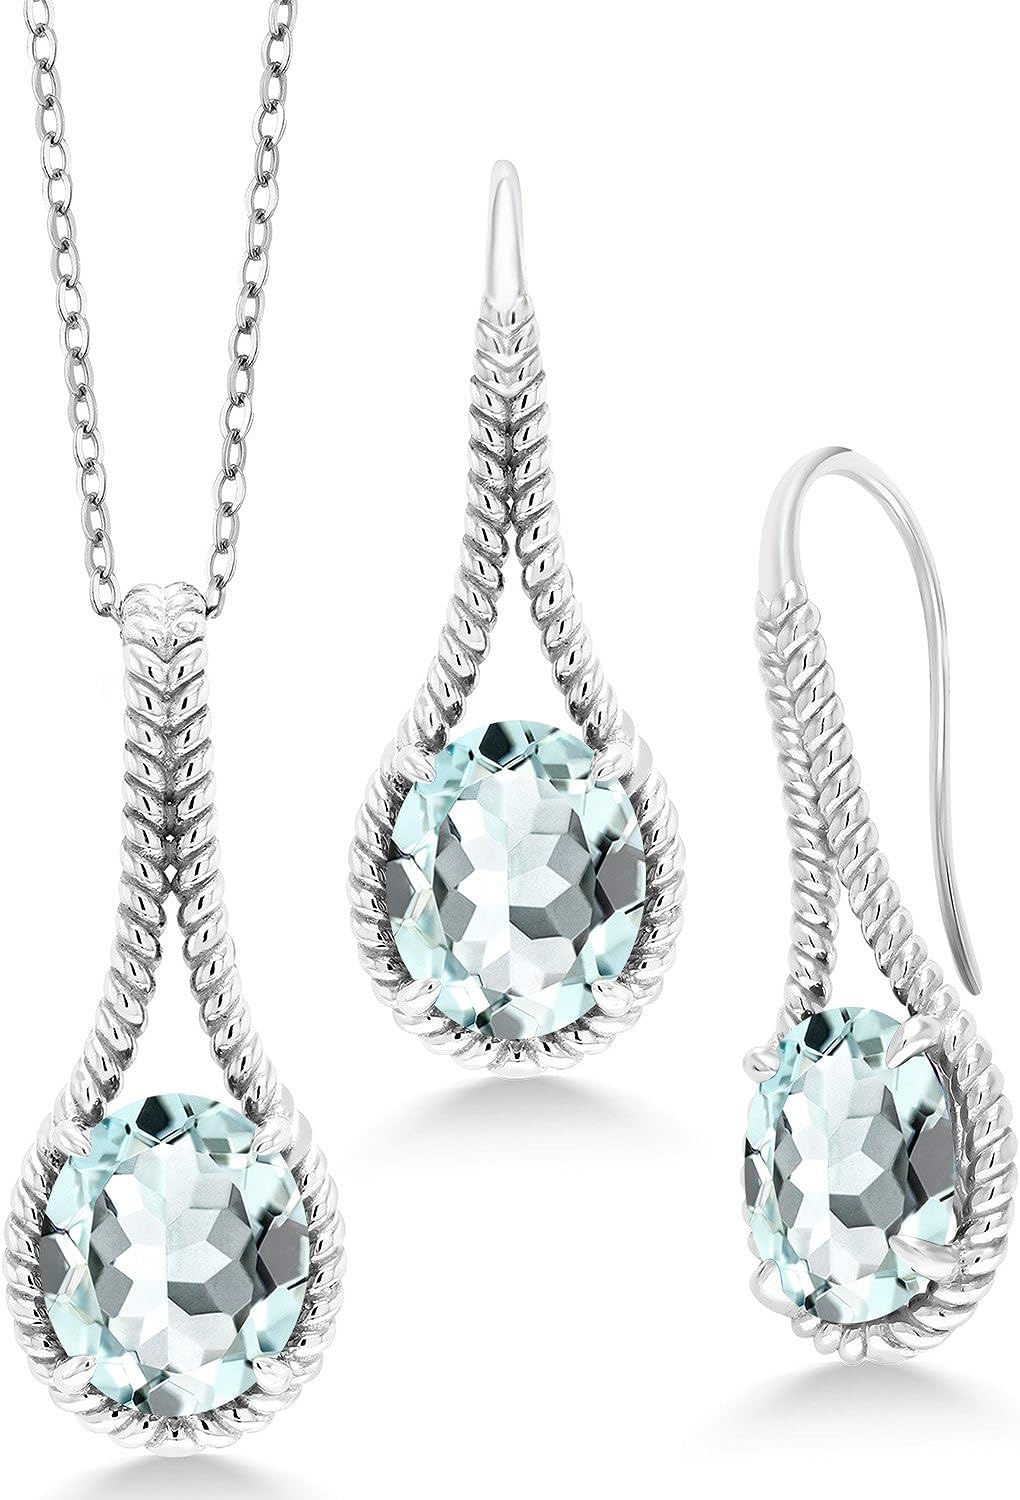 Gem Stone King 925 Sterling Silver Sky Blue Simulated Aquamarine Pendant and Earrings Jewelry Set For Women (11.79 Cttw, with 18 Inch Silver Chain)